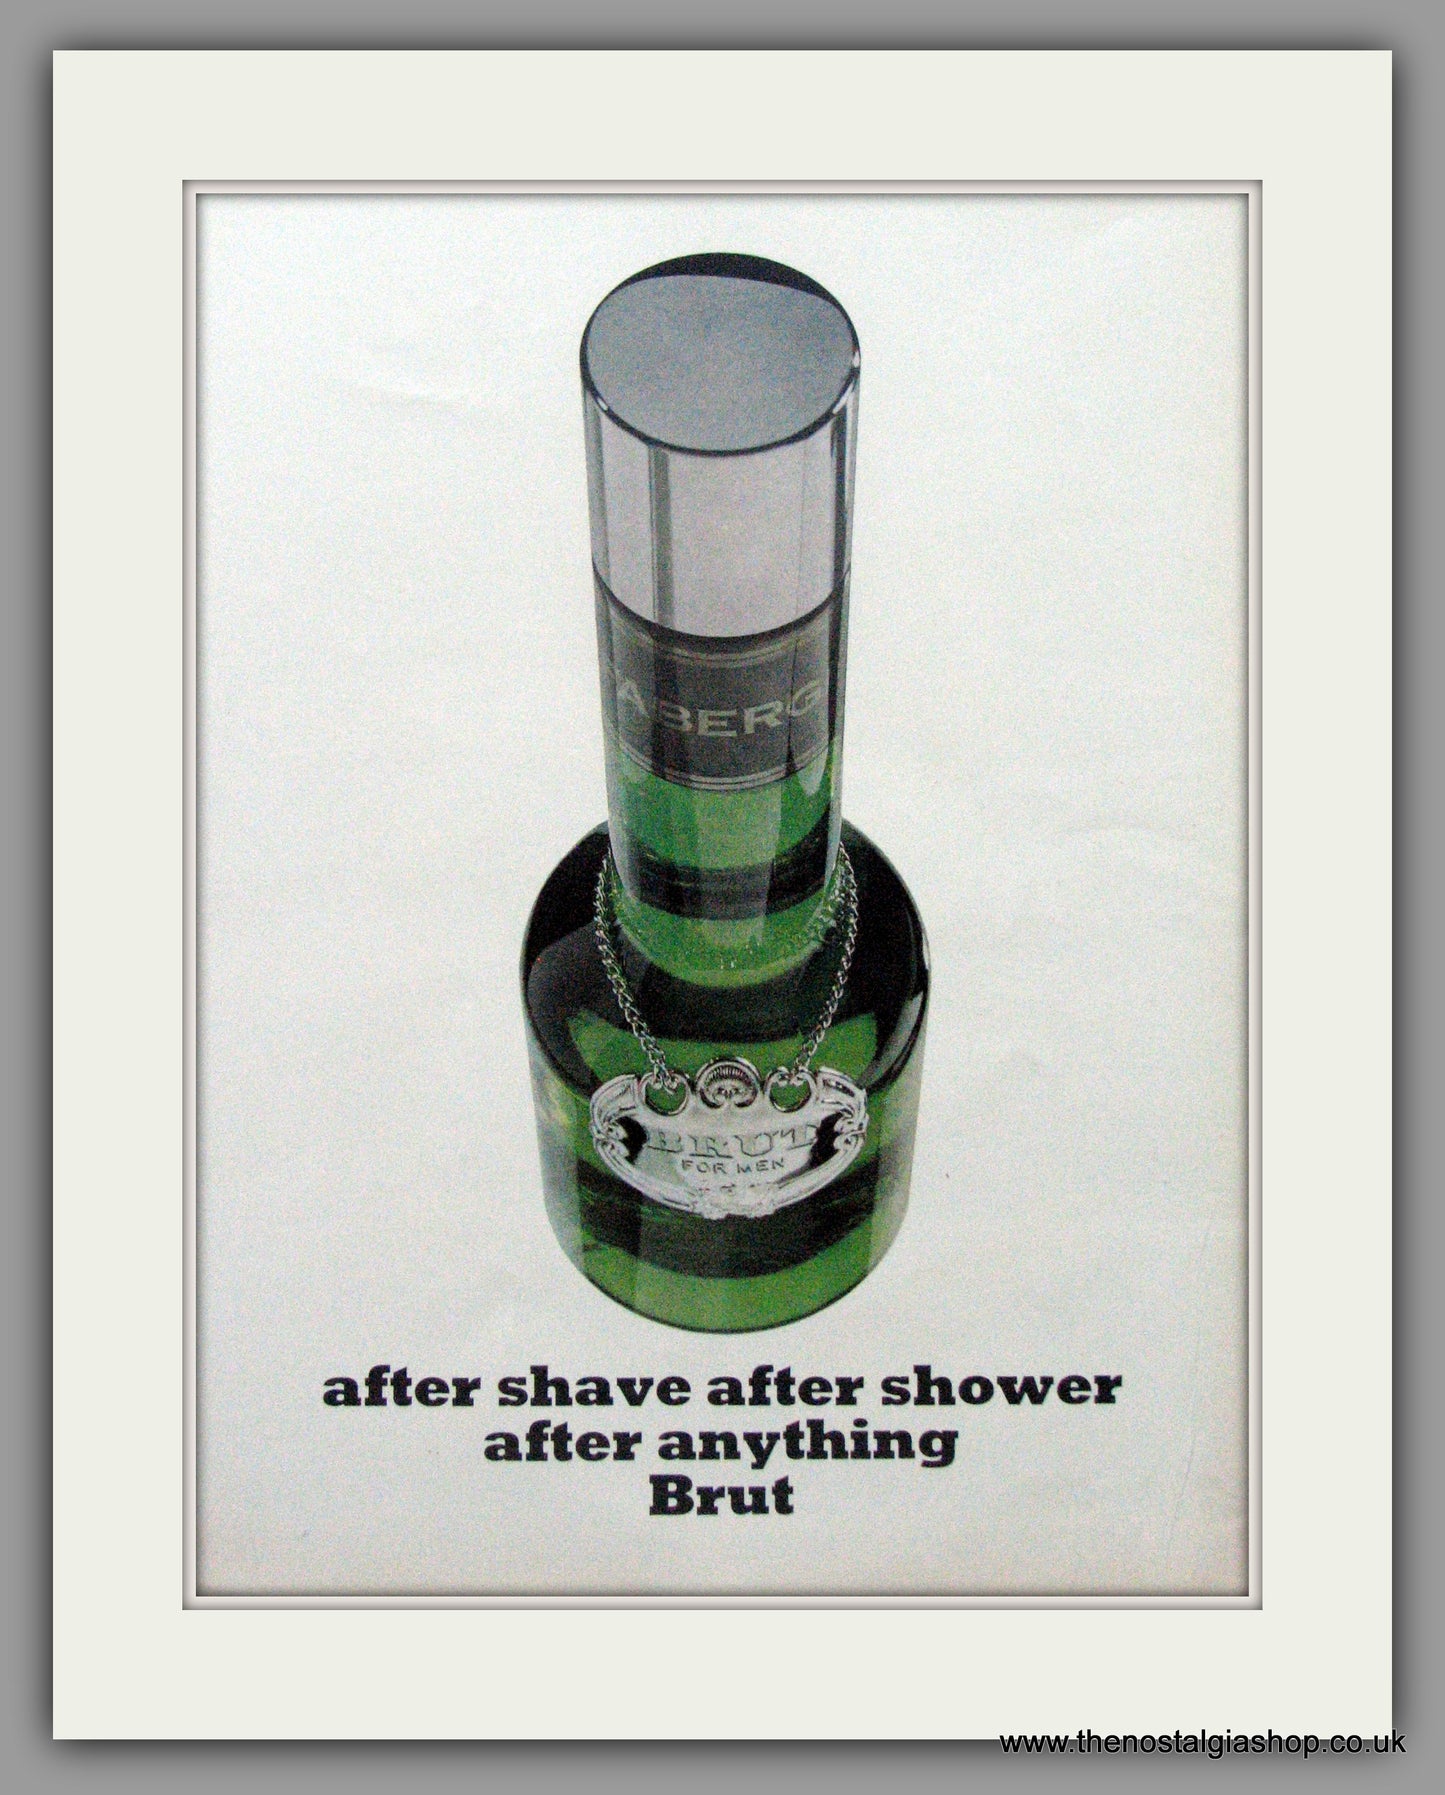 Brut After Shave by Faberge. 1968 Original Advert (ref AD990)